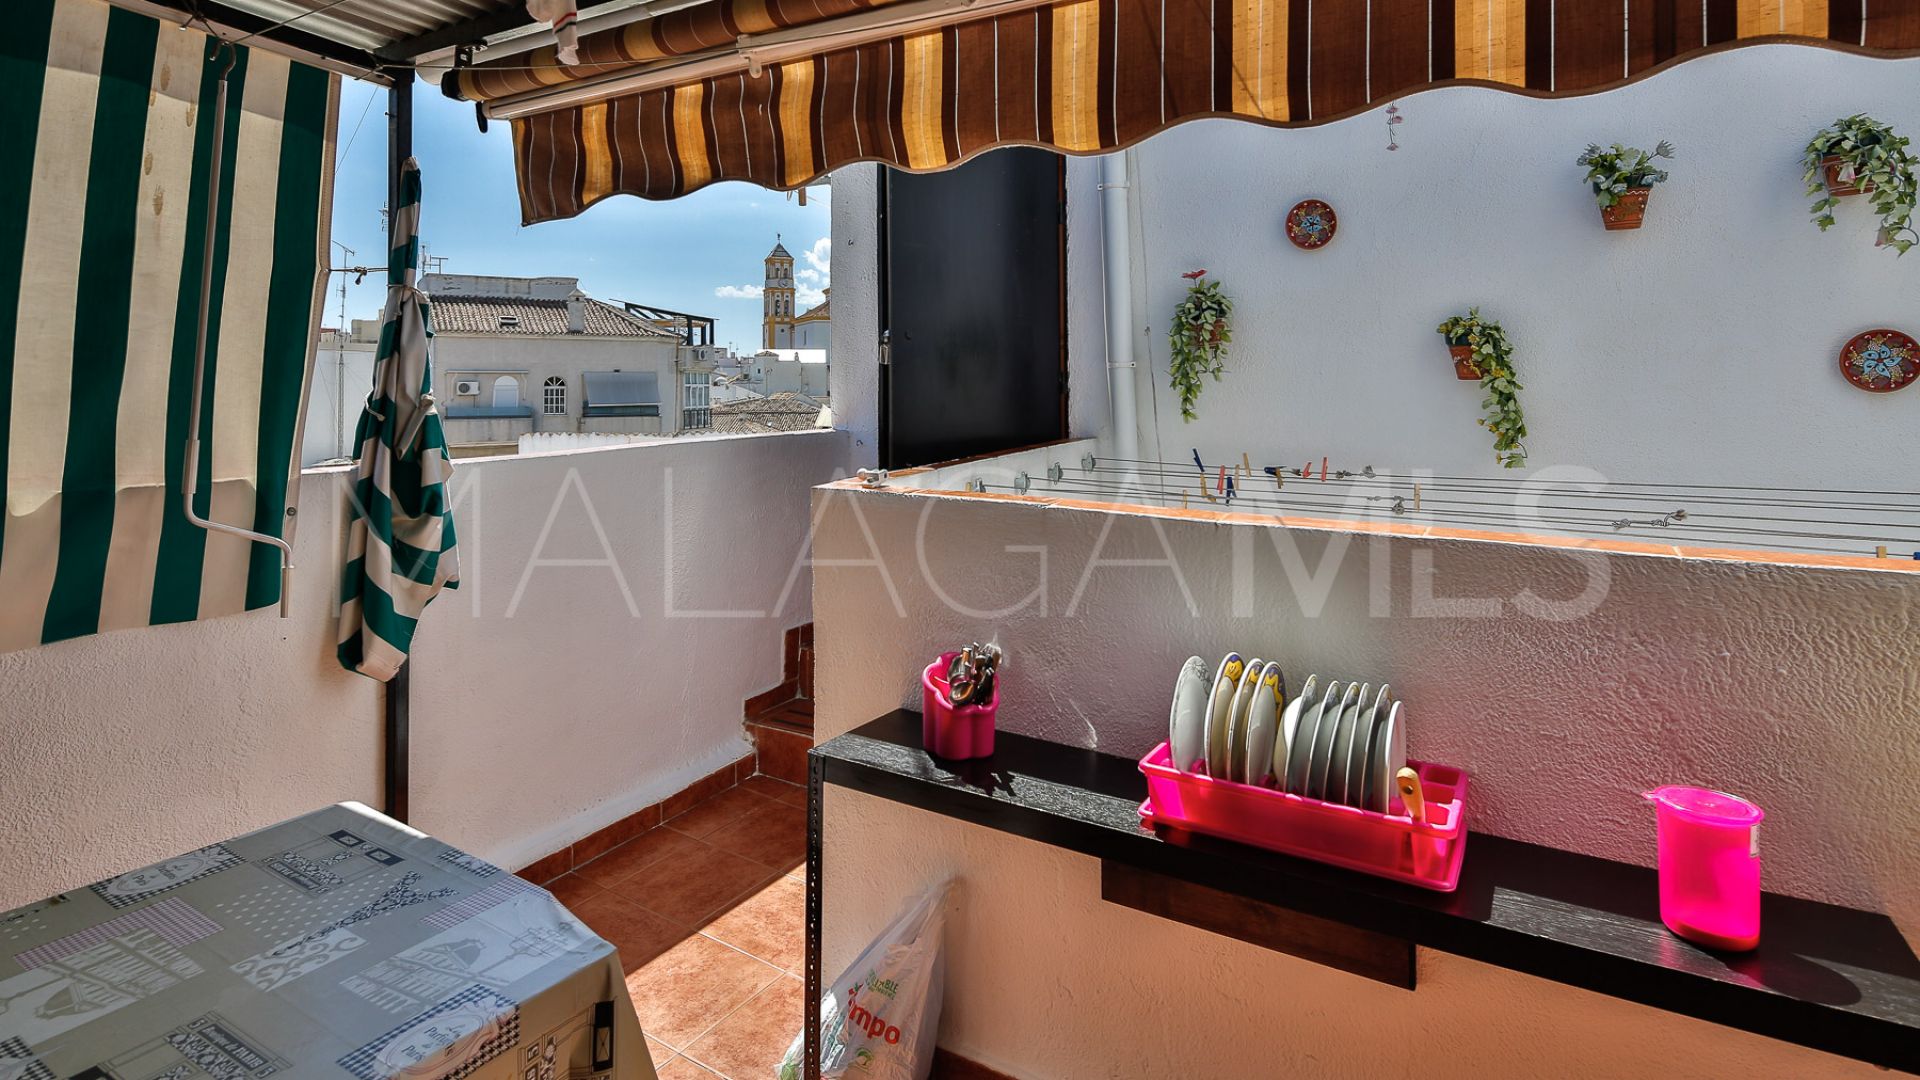 Adosado for sale in Casco antiguo with 4 bedrooms